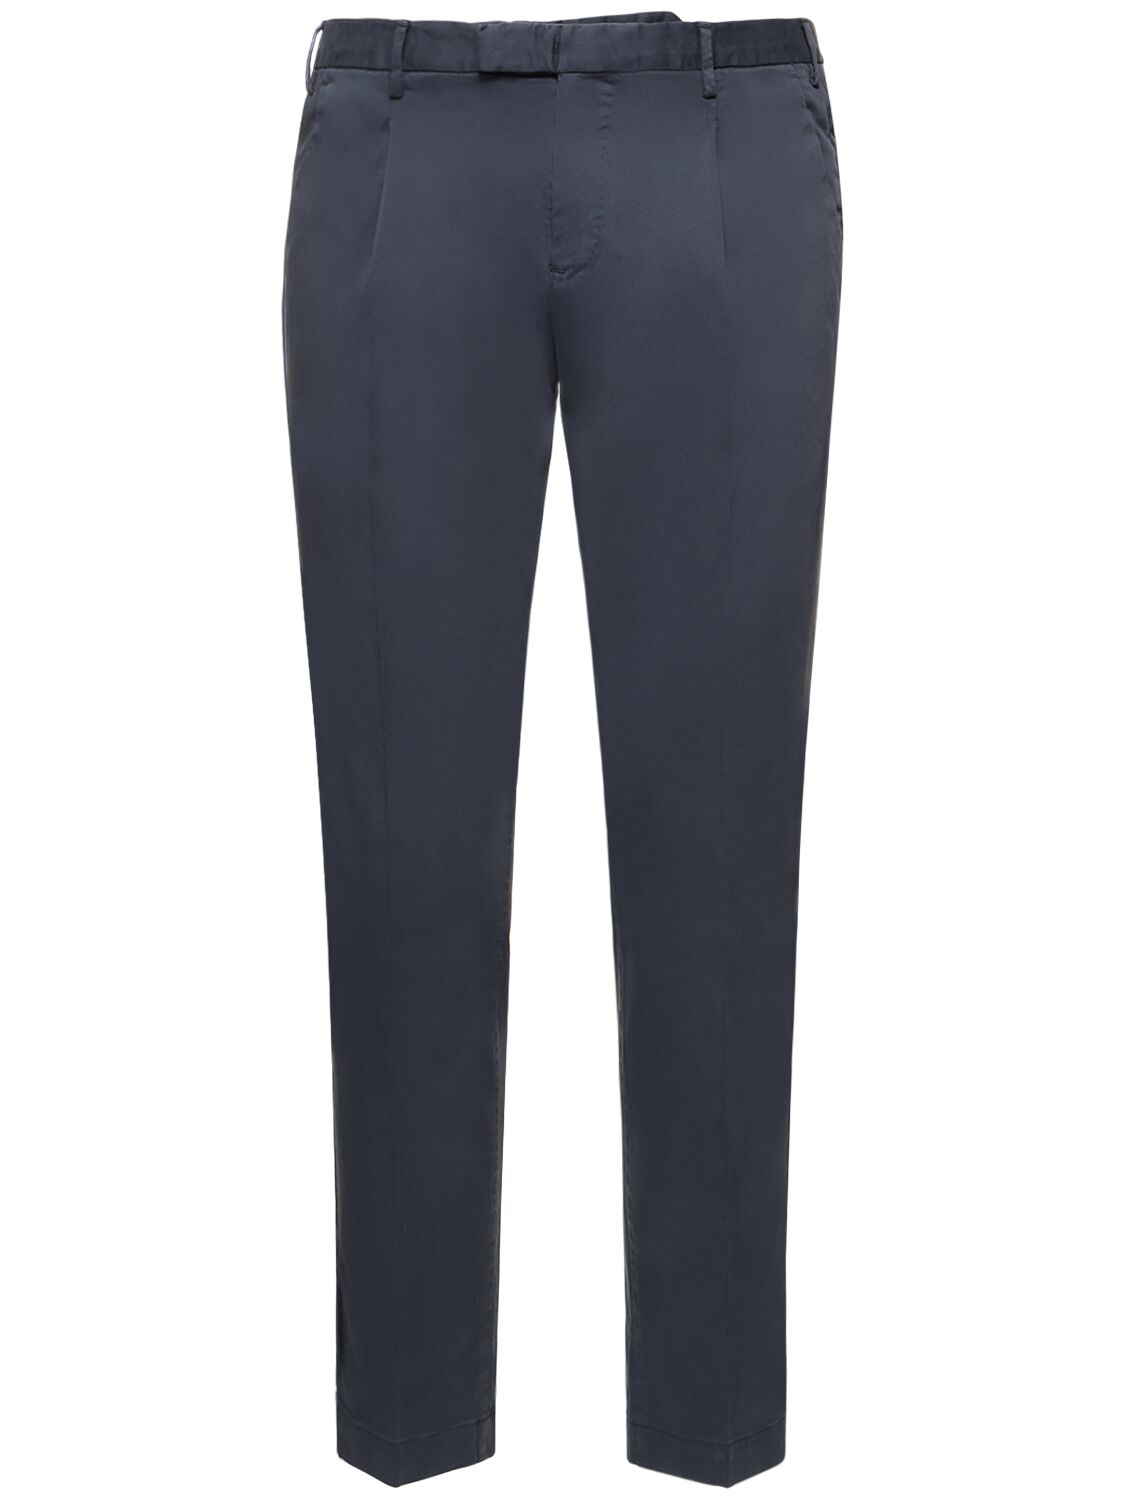 Pt Torino Stretch Cotton Pants In Navy